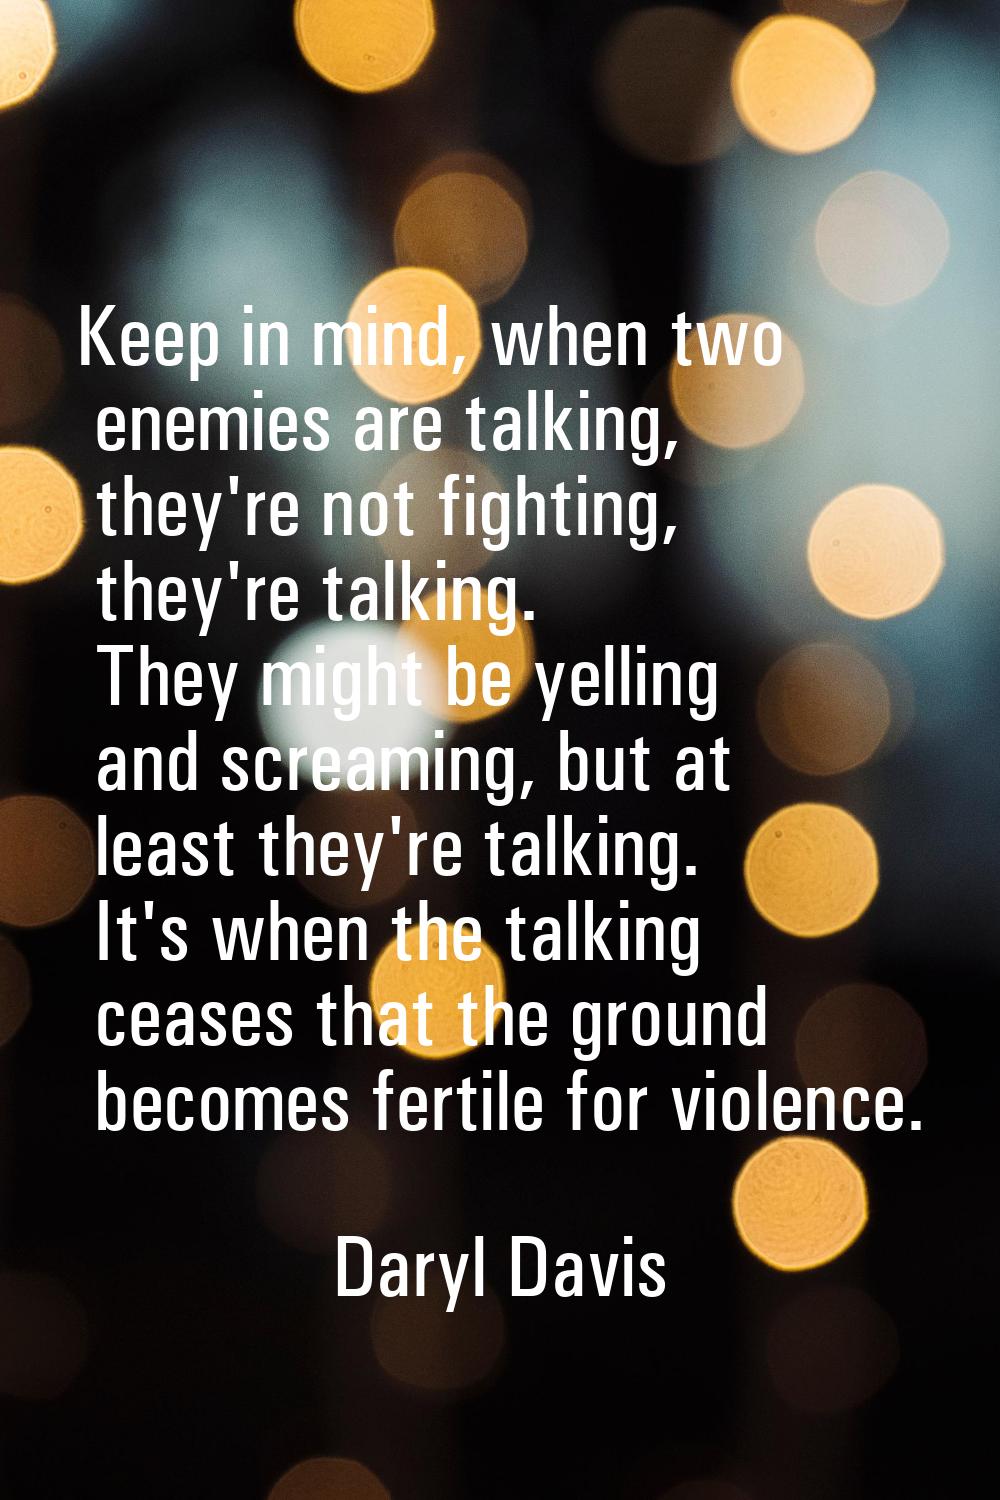 Keep in mind, when two enemies are talking, they're not fighting, they're talking. They might be ye